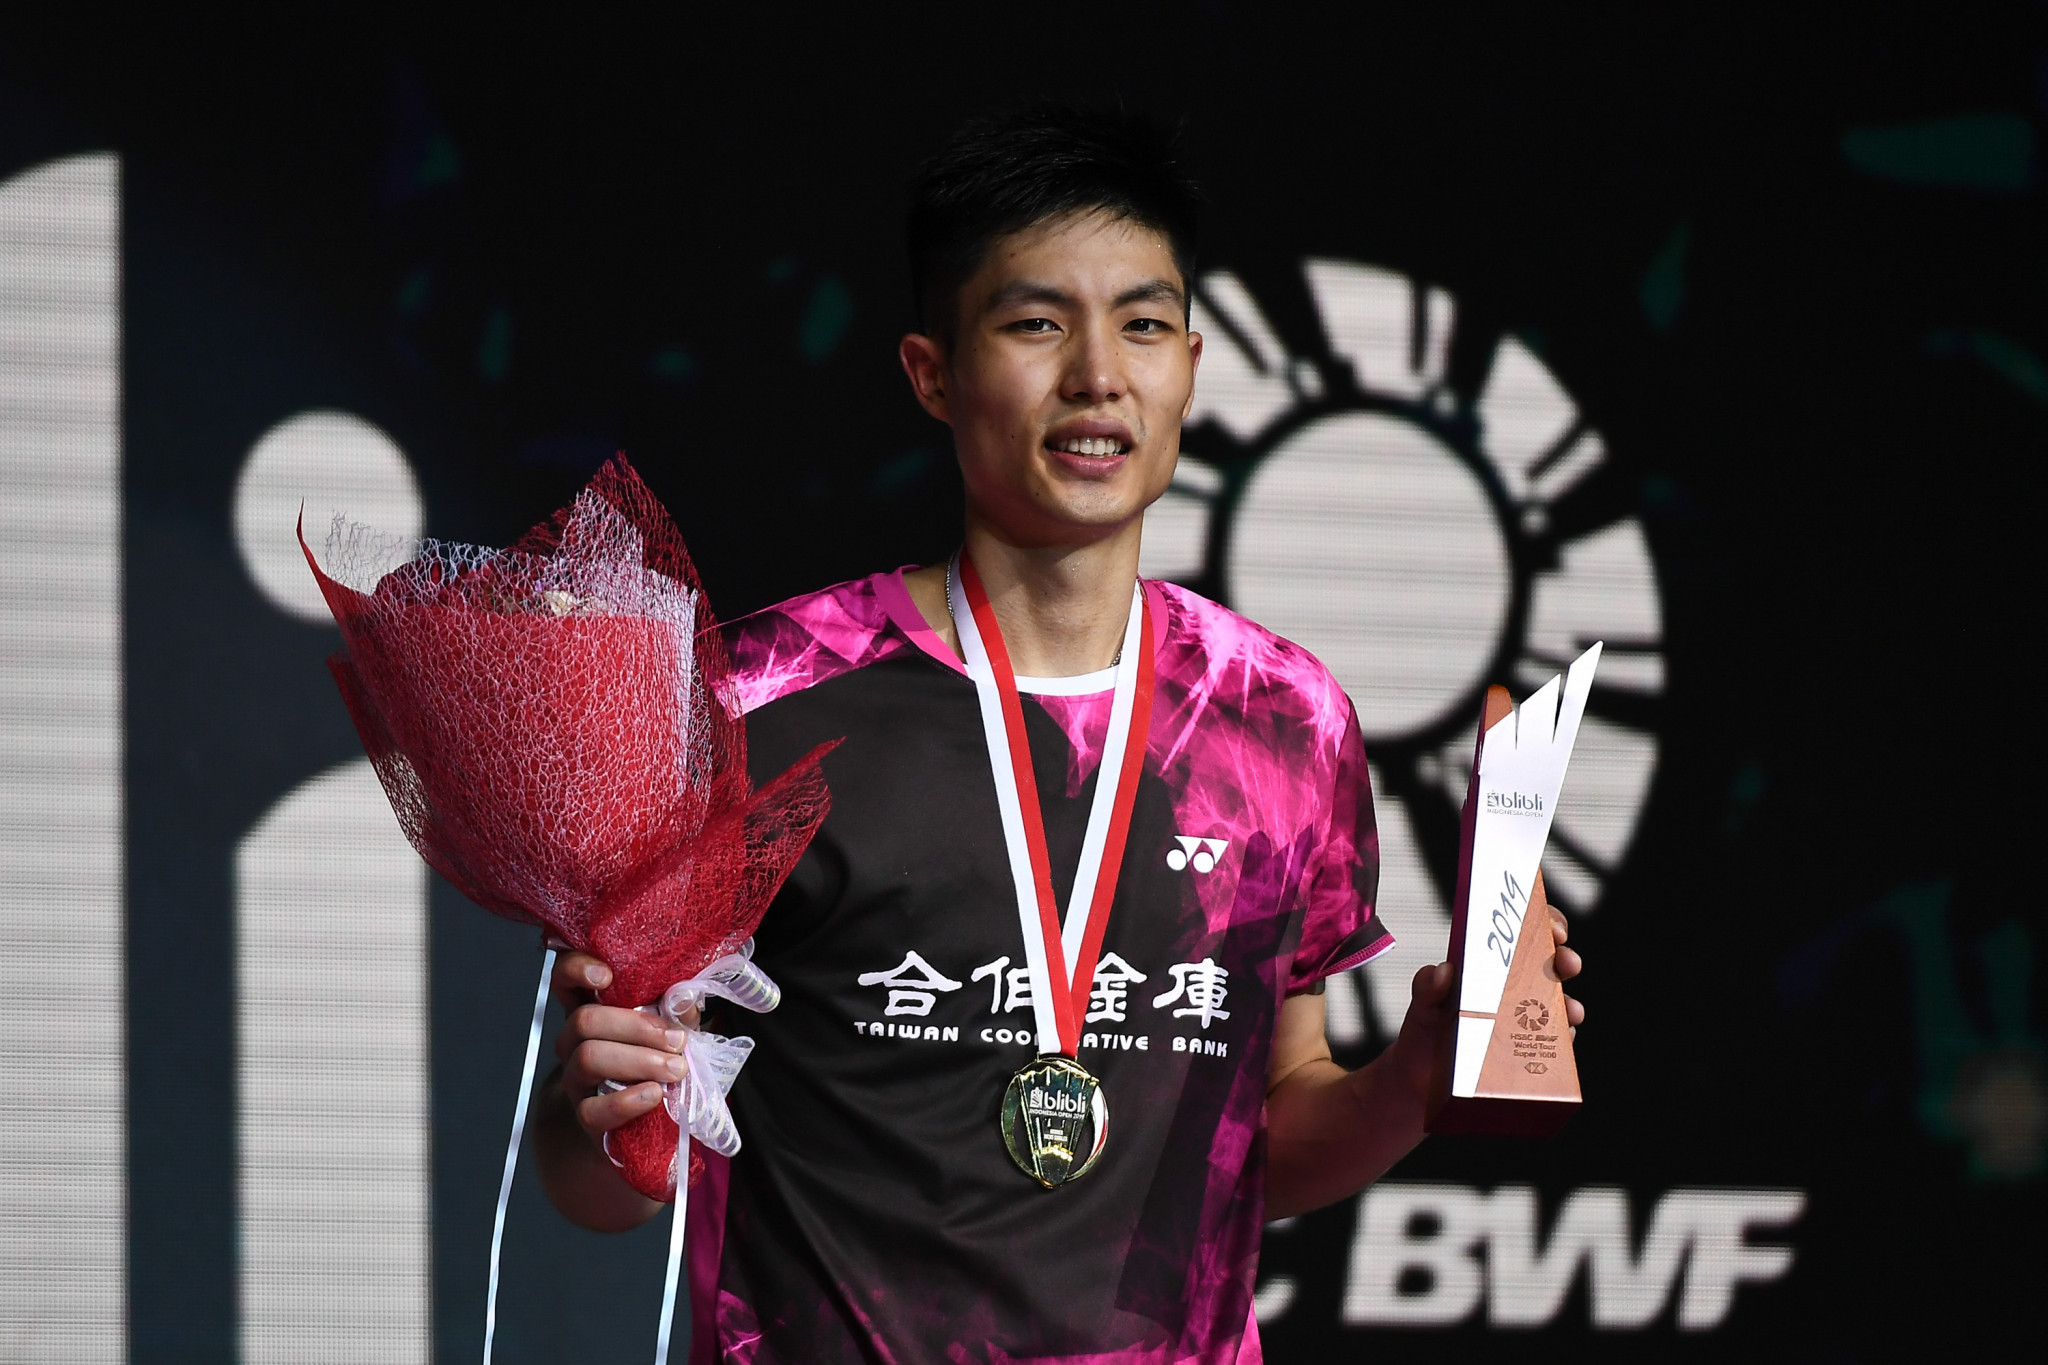 Chou Tien-chen won his first Super 1000 event ©Getty Images